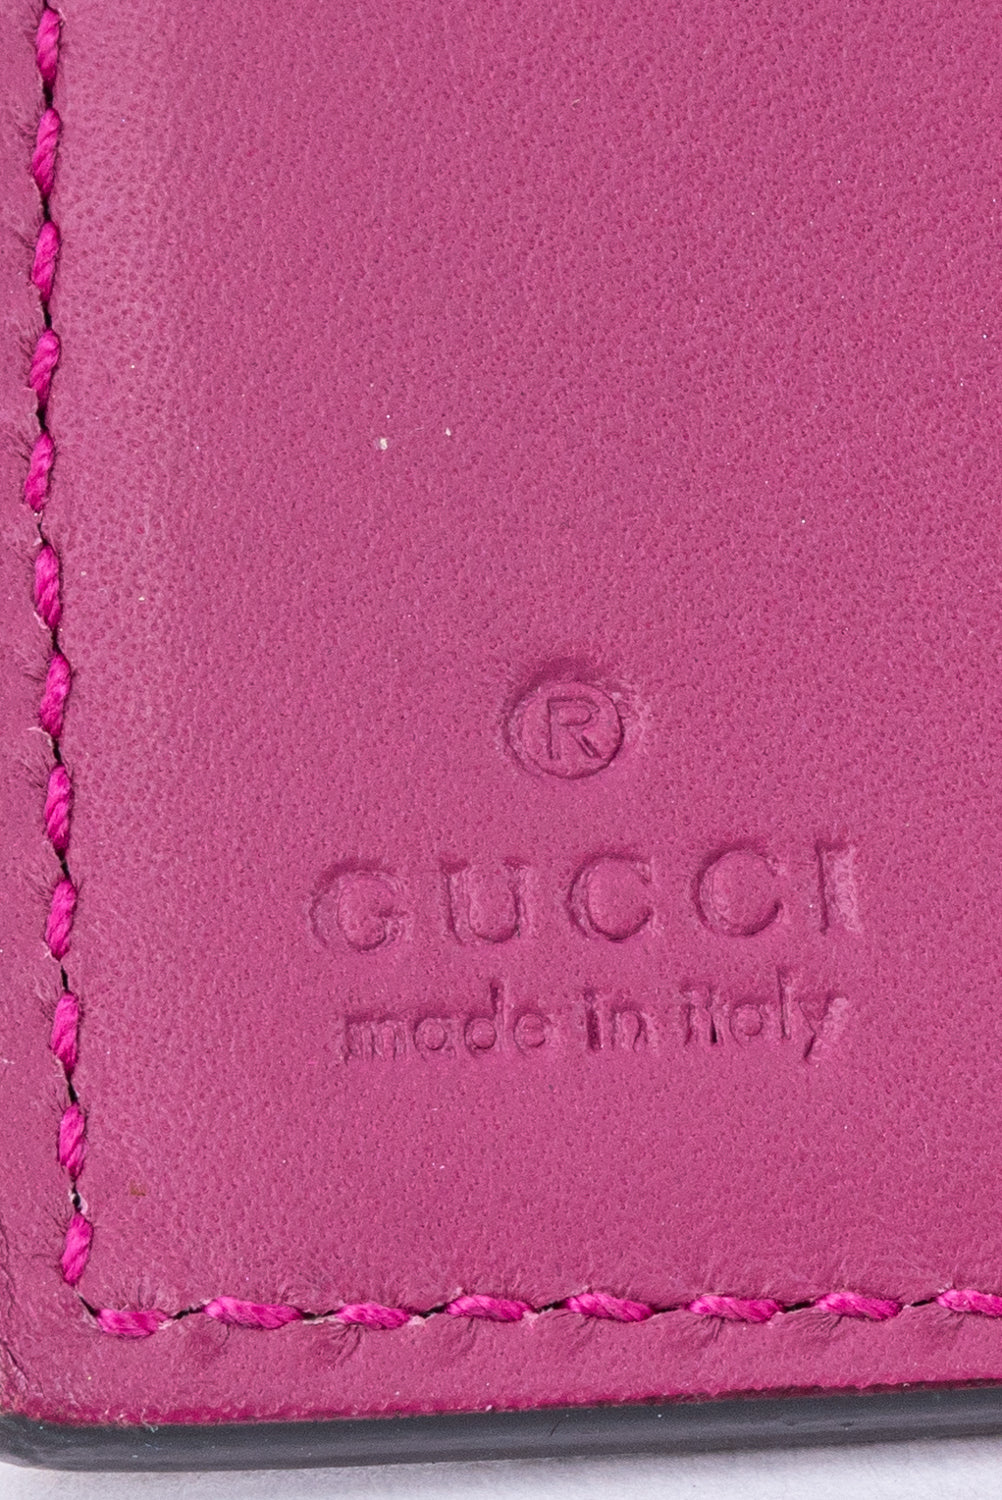 Gucci GG Supreme Canvas Brown Red French Wallet